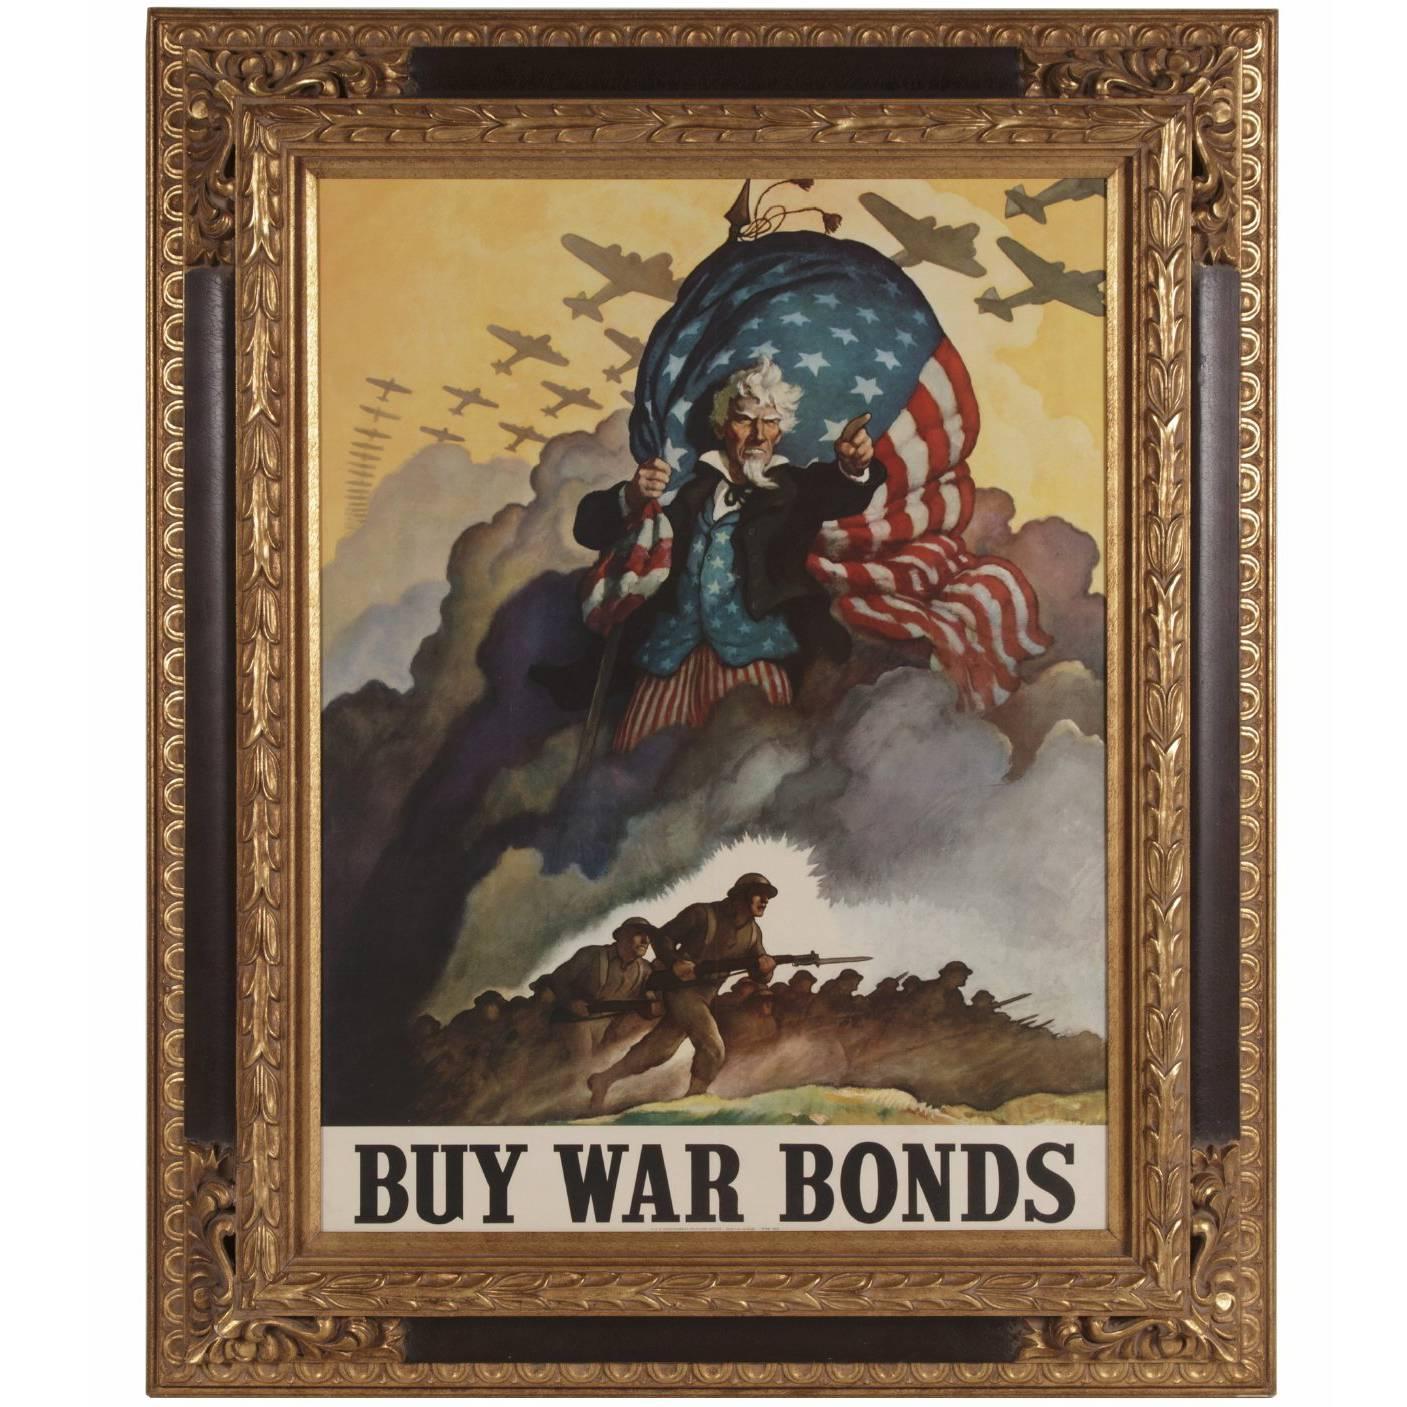 Striking and Rare WWII Poster by N.C Wyeth, with a Windswept Image of Uncle Sam